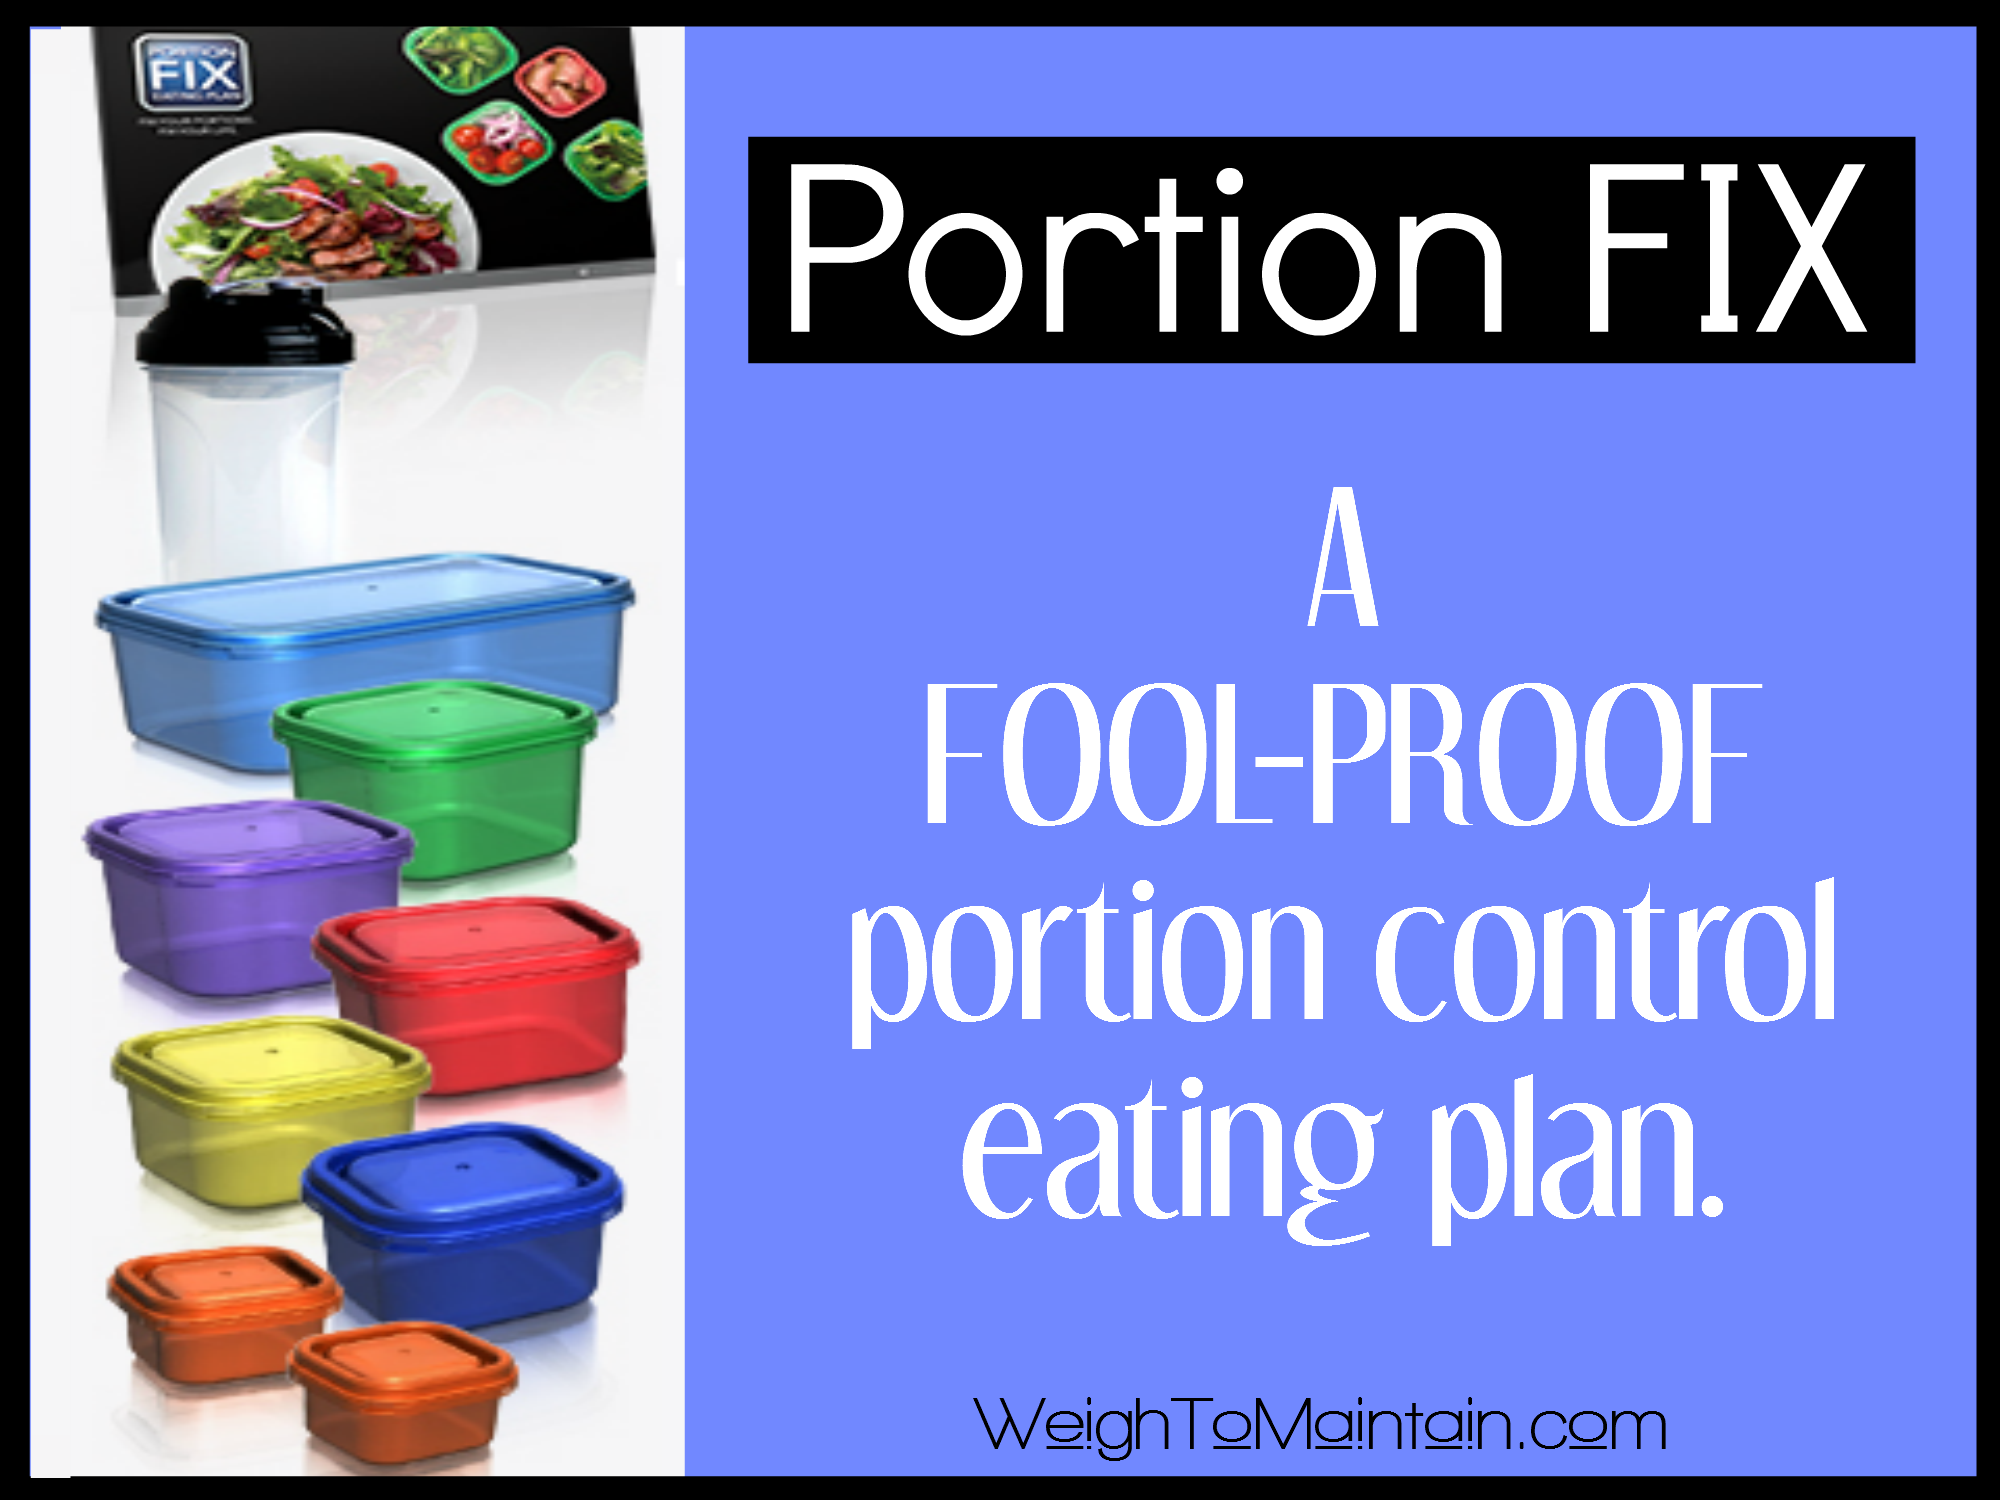 Review: Beachbody's New Portion Fix – A Portion Control Eating